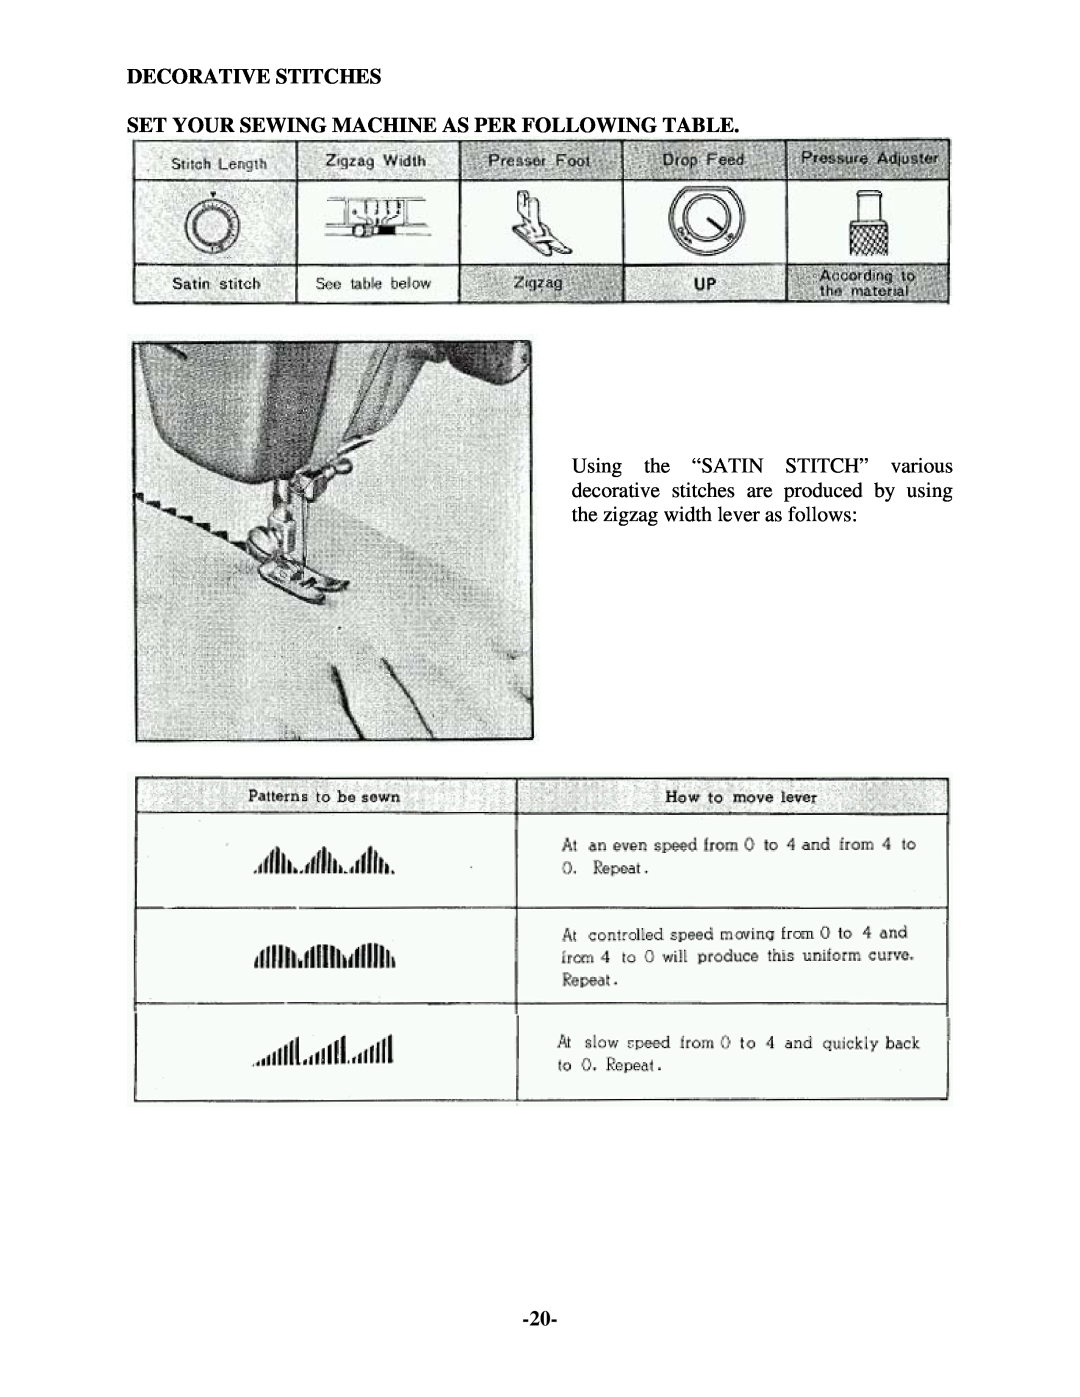 Brother 681B-UG manual Decorative Stitches Set Your Sewing Machine As Per Following Table 